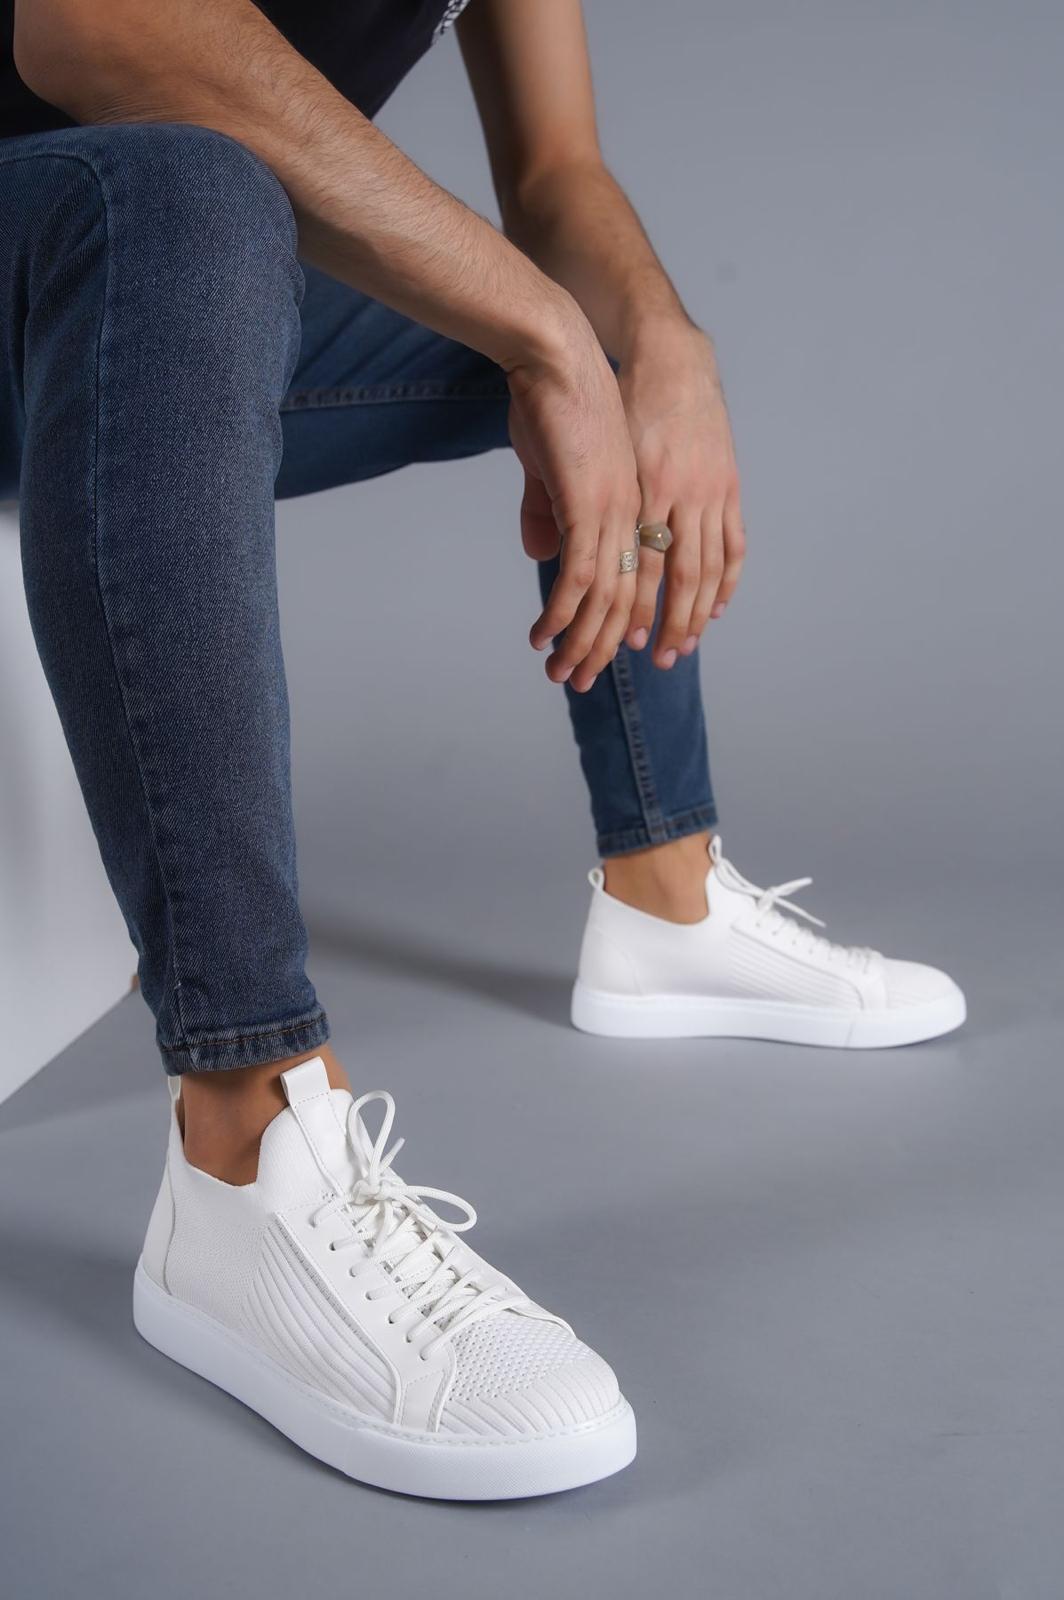 KB-112 White Knitwear Lace-Up Casual Men's Sneakers Shoes - STREETMODE ™